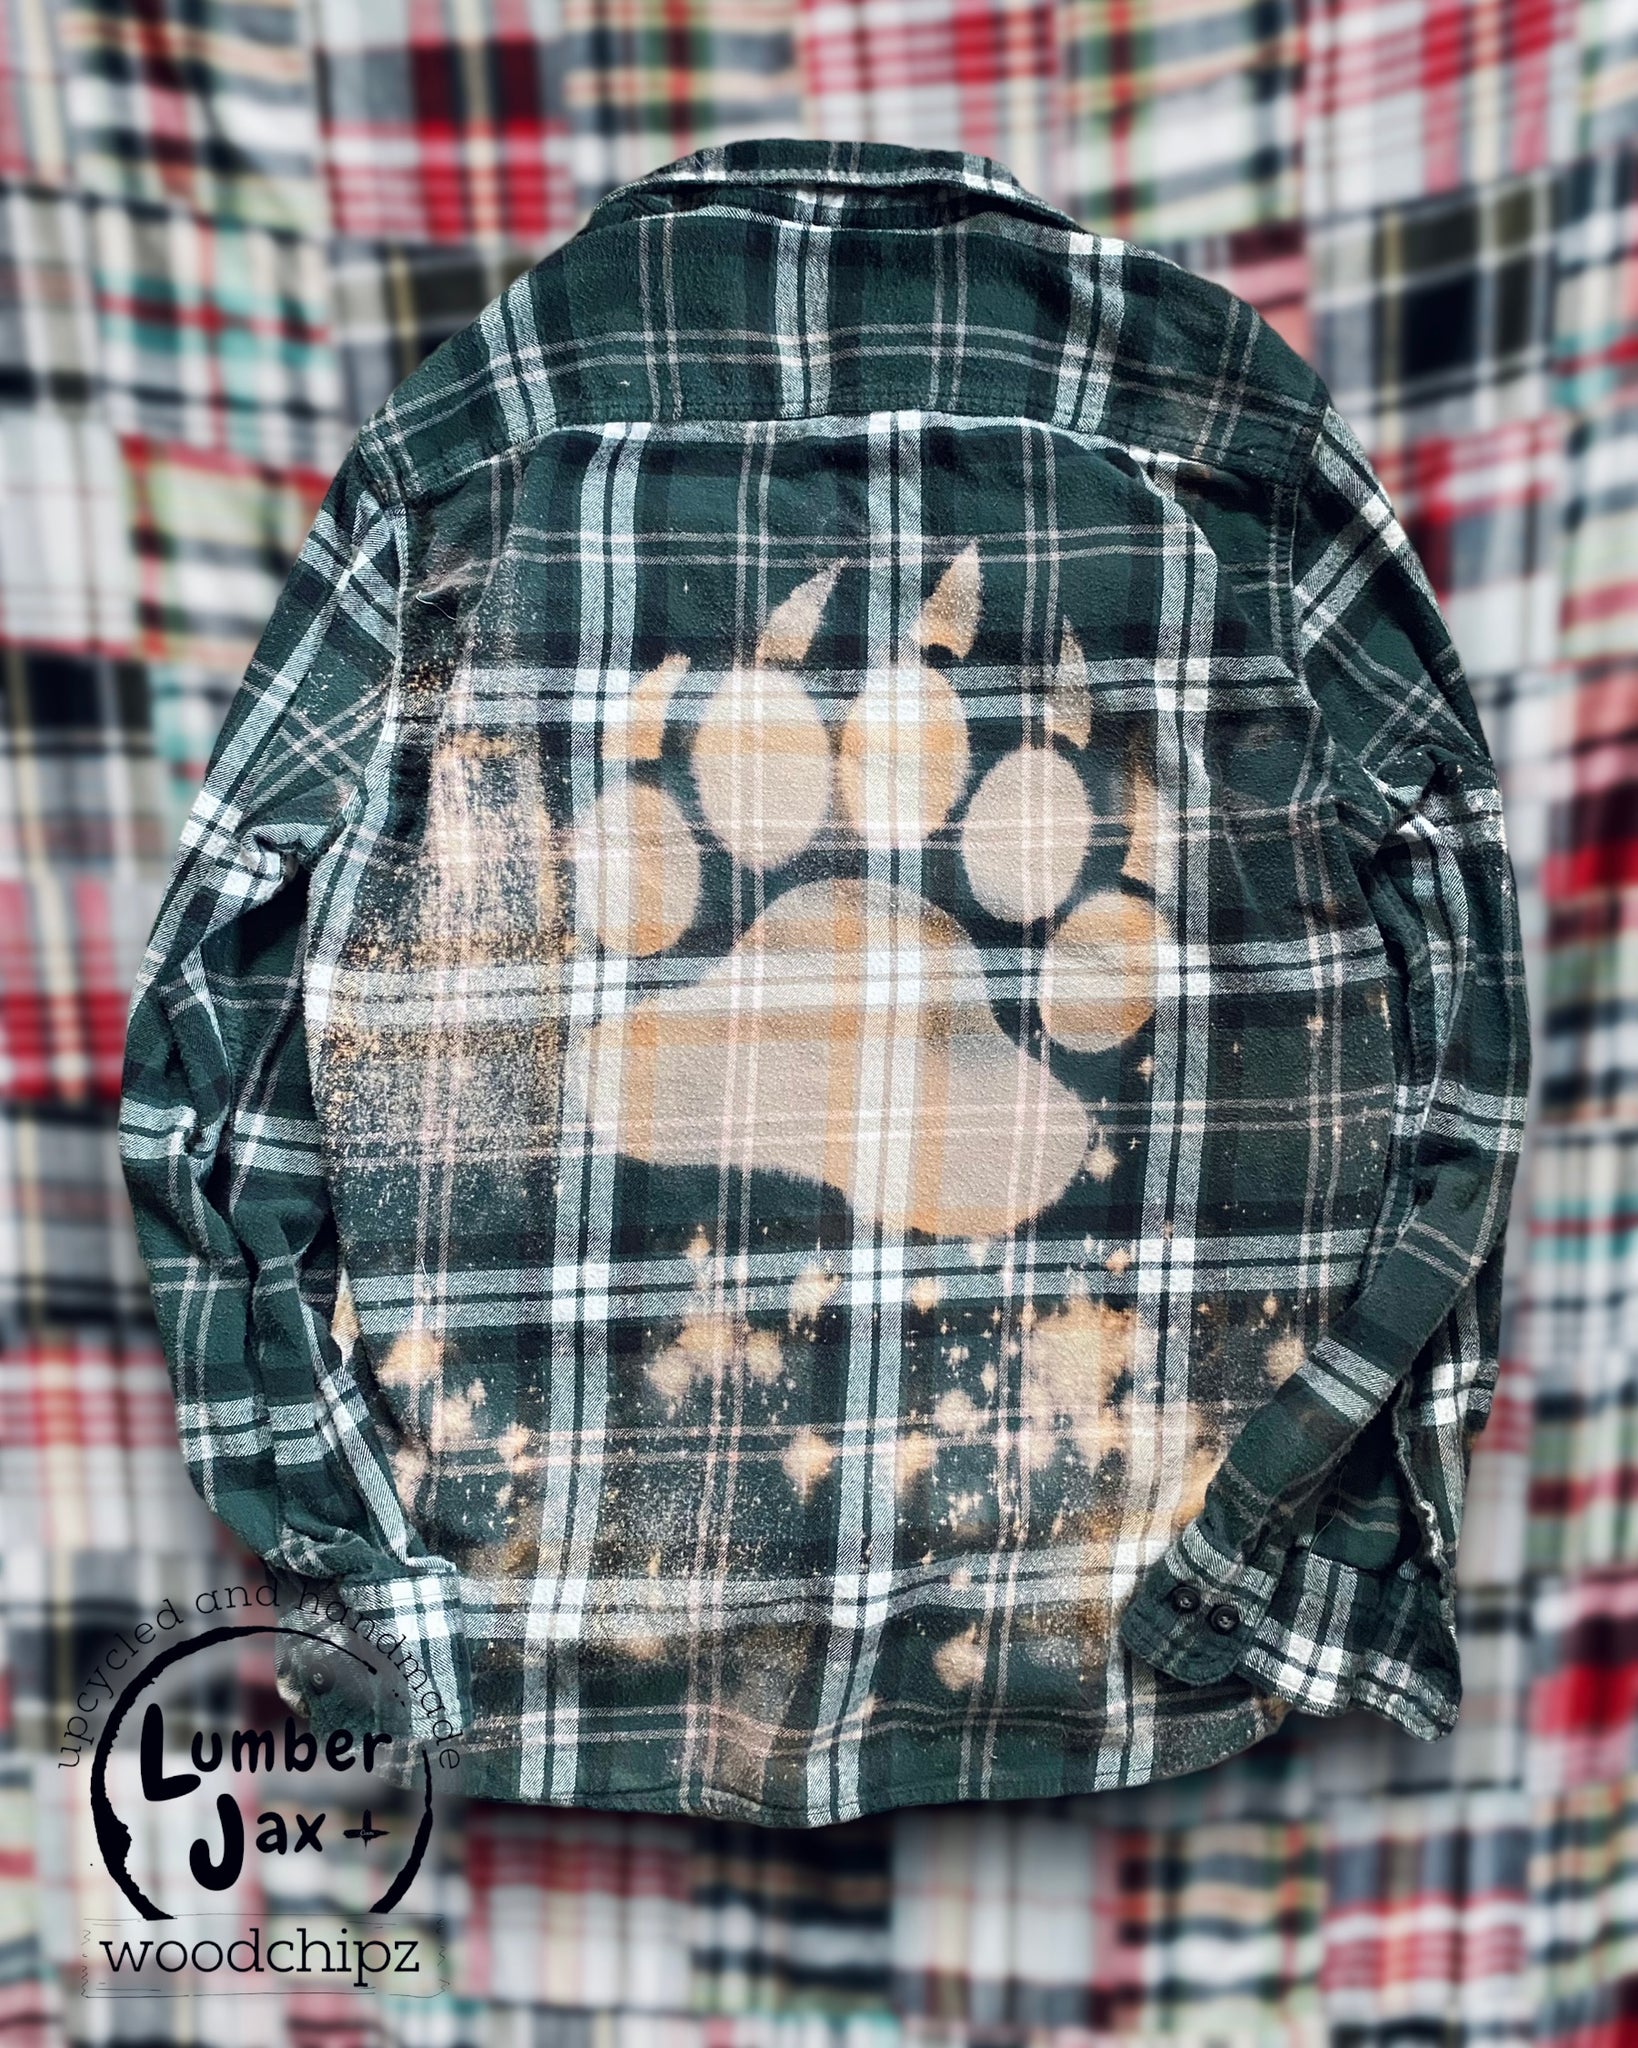 Bear Claw Stamped Flannel